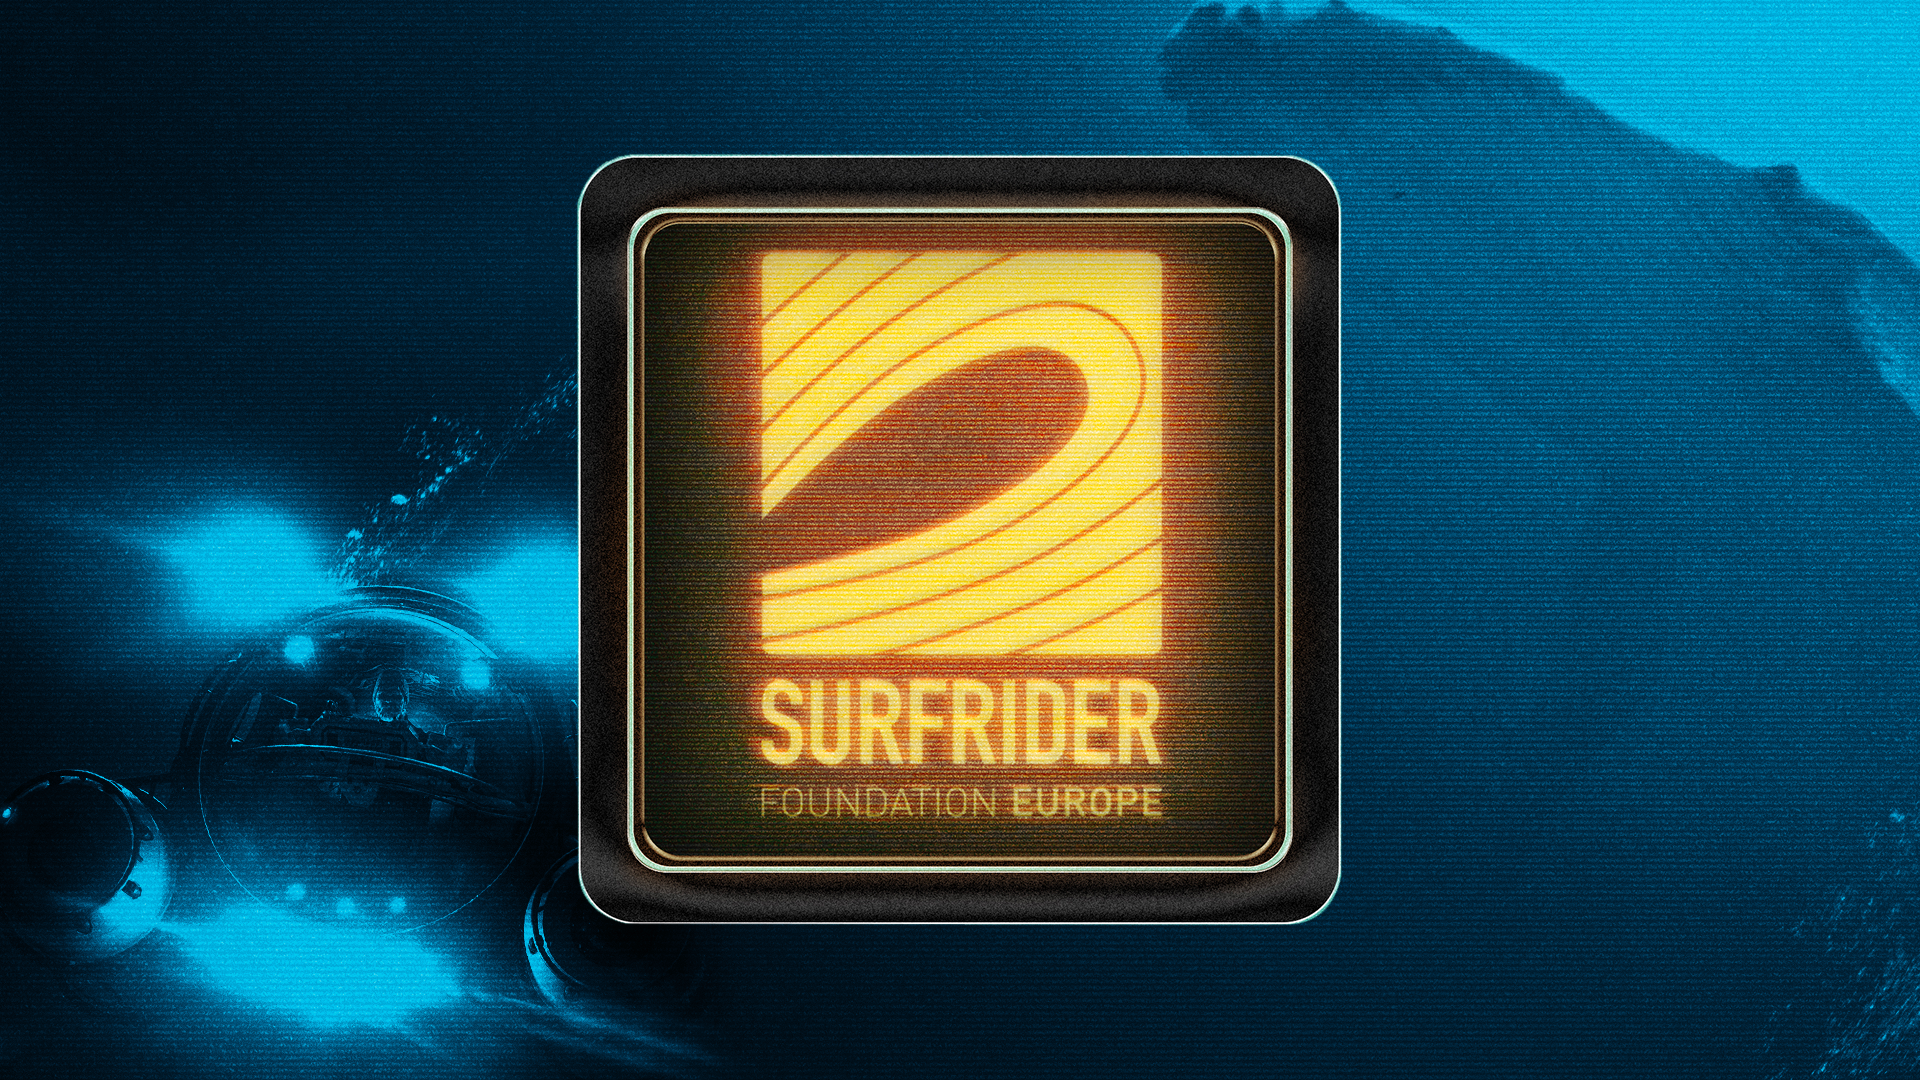 Icon for Surfrider: Building A Better World